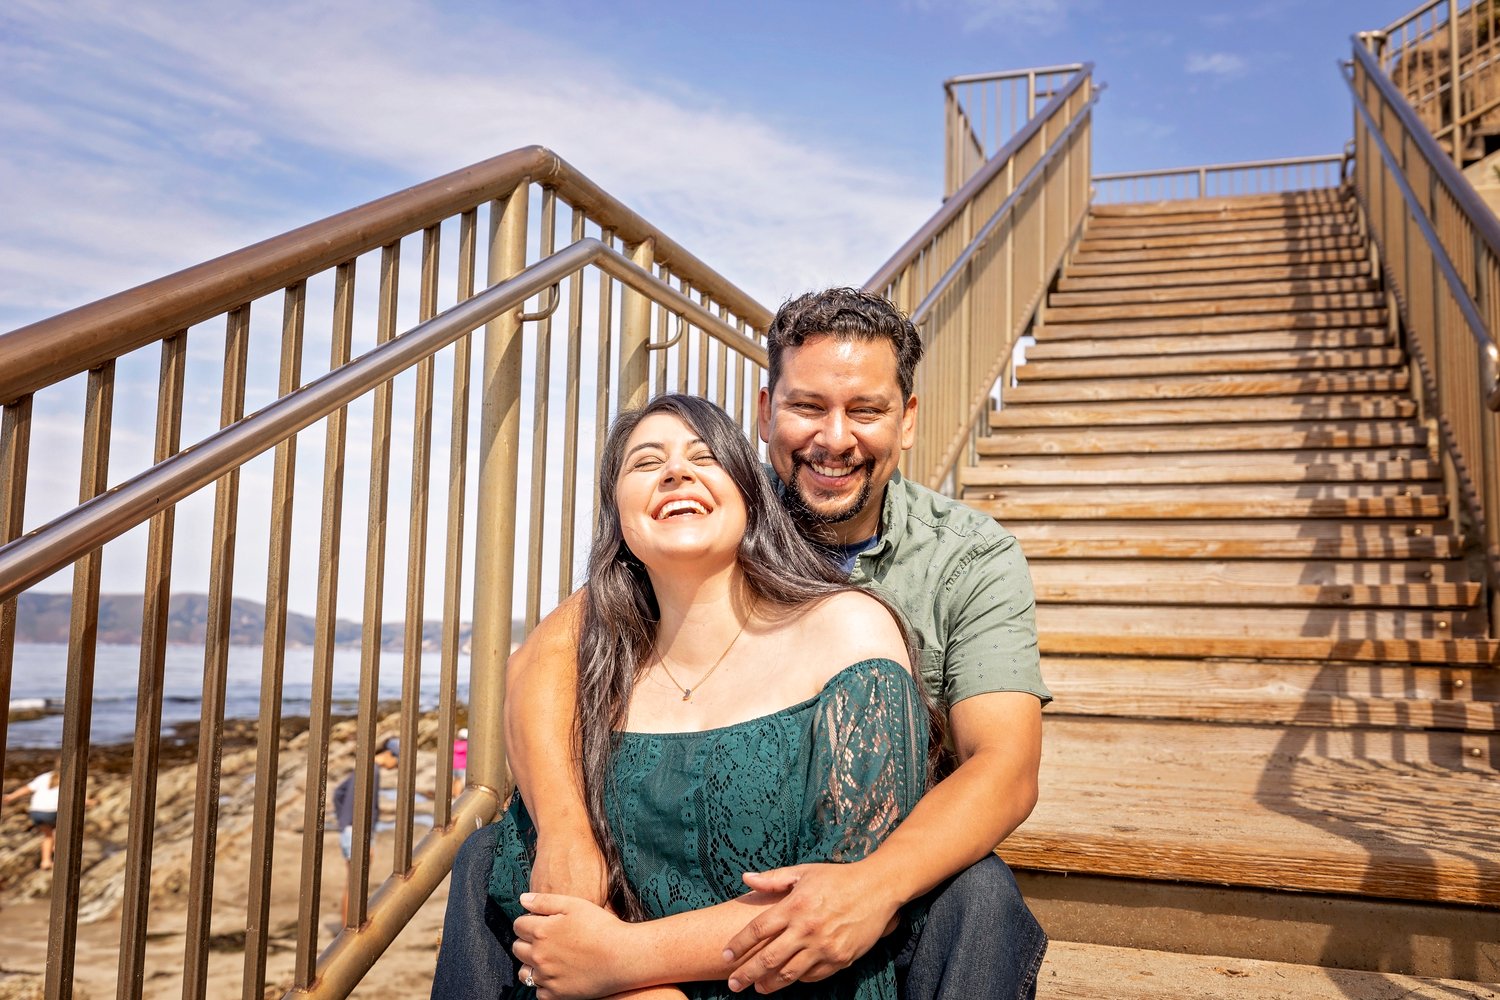 Couple laughing together while sitting on wood steps at the beach